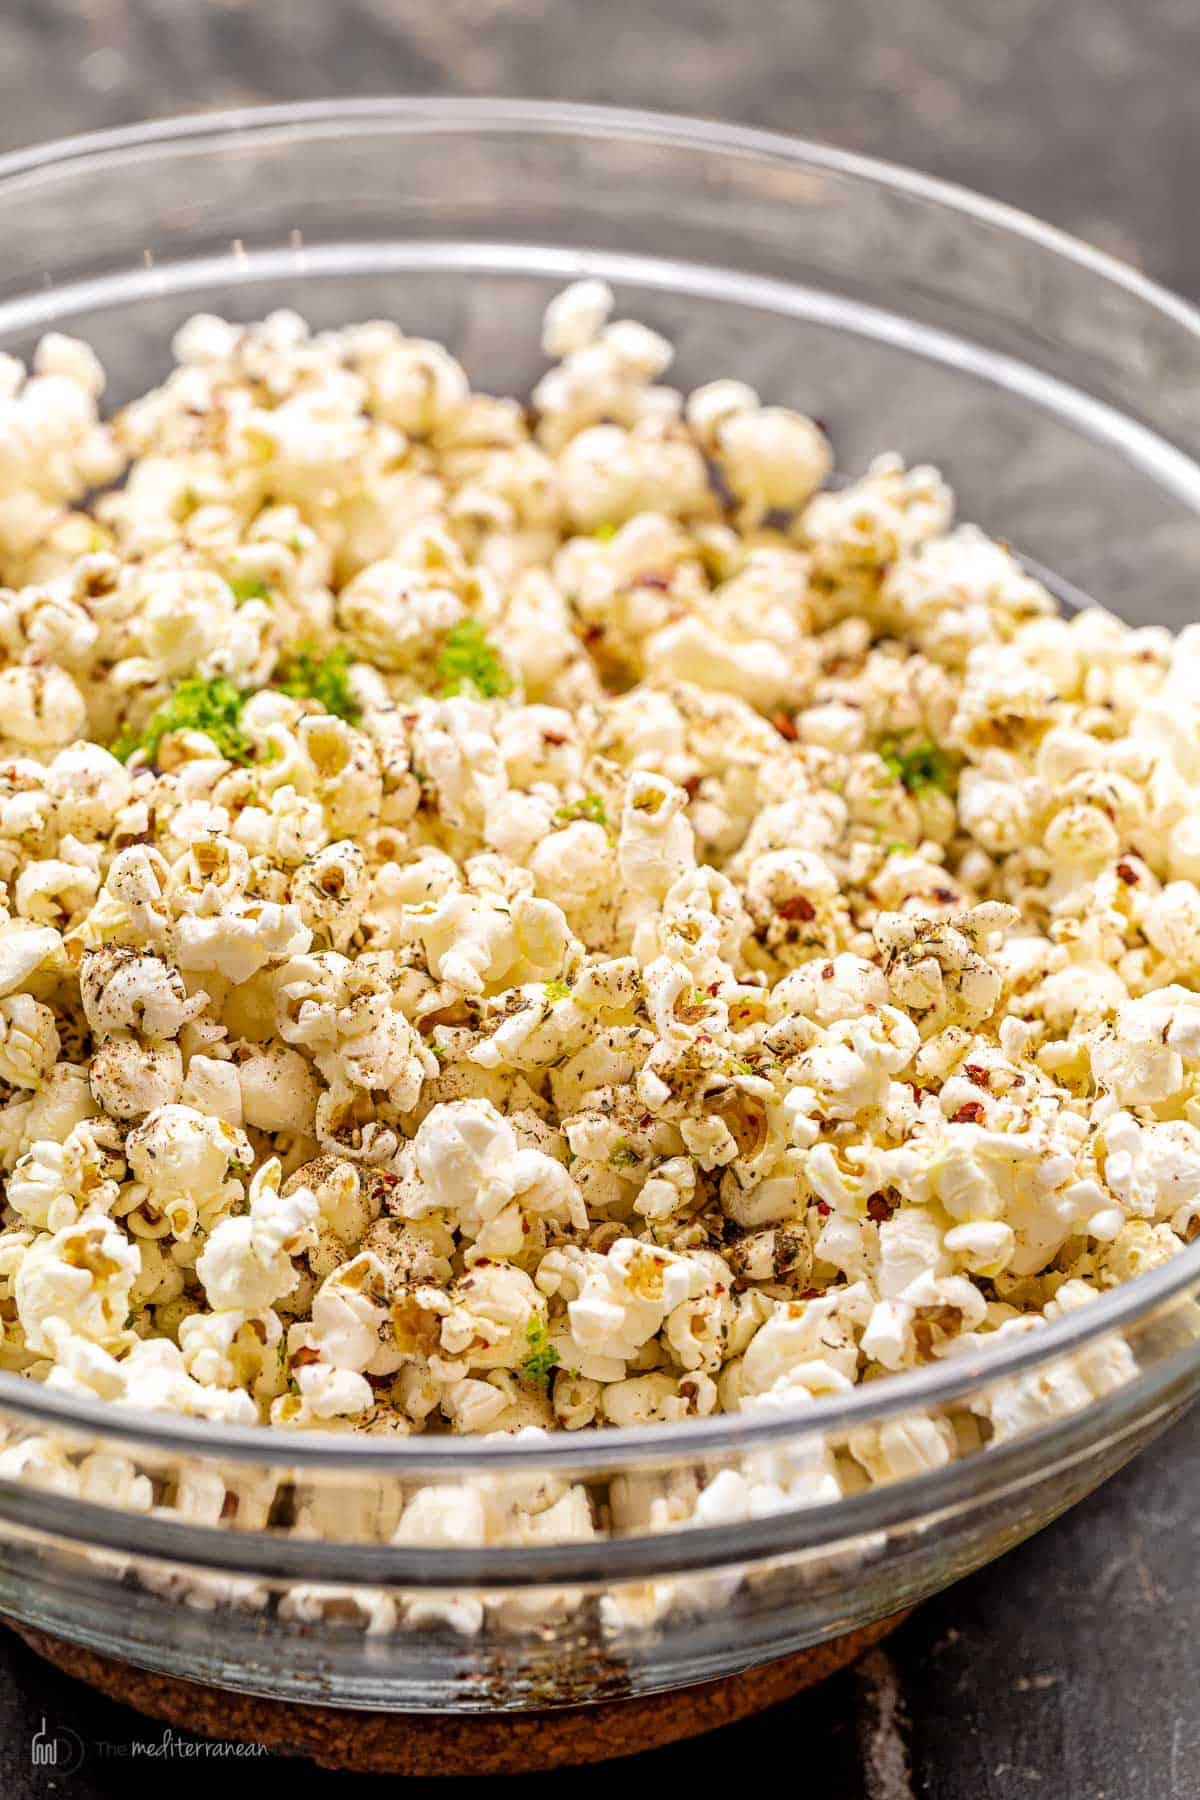 Grab the popcorn! Take your home entertainment to the next level